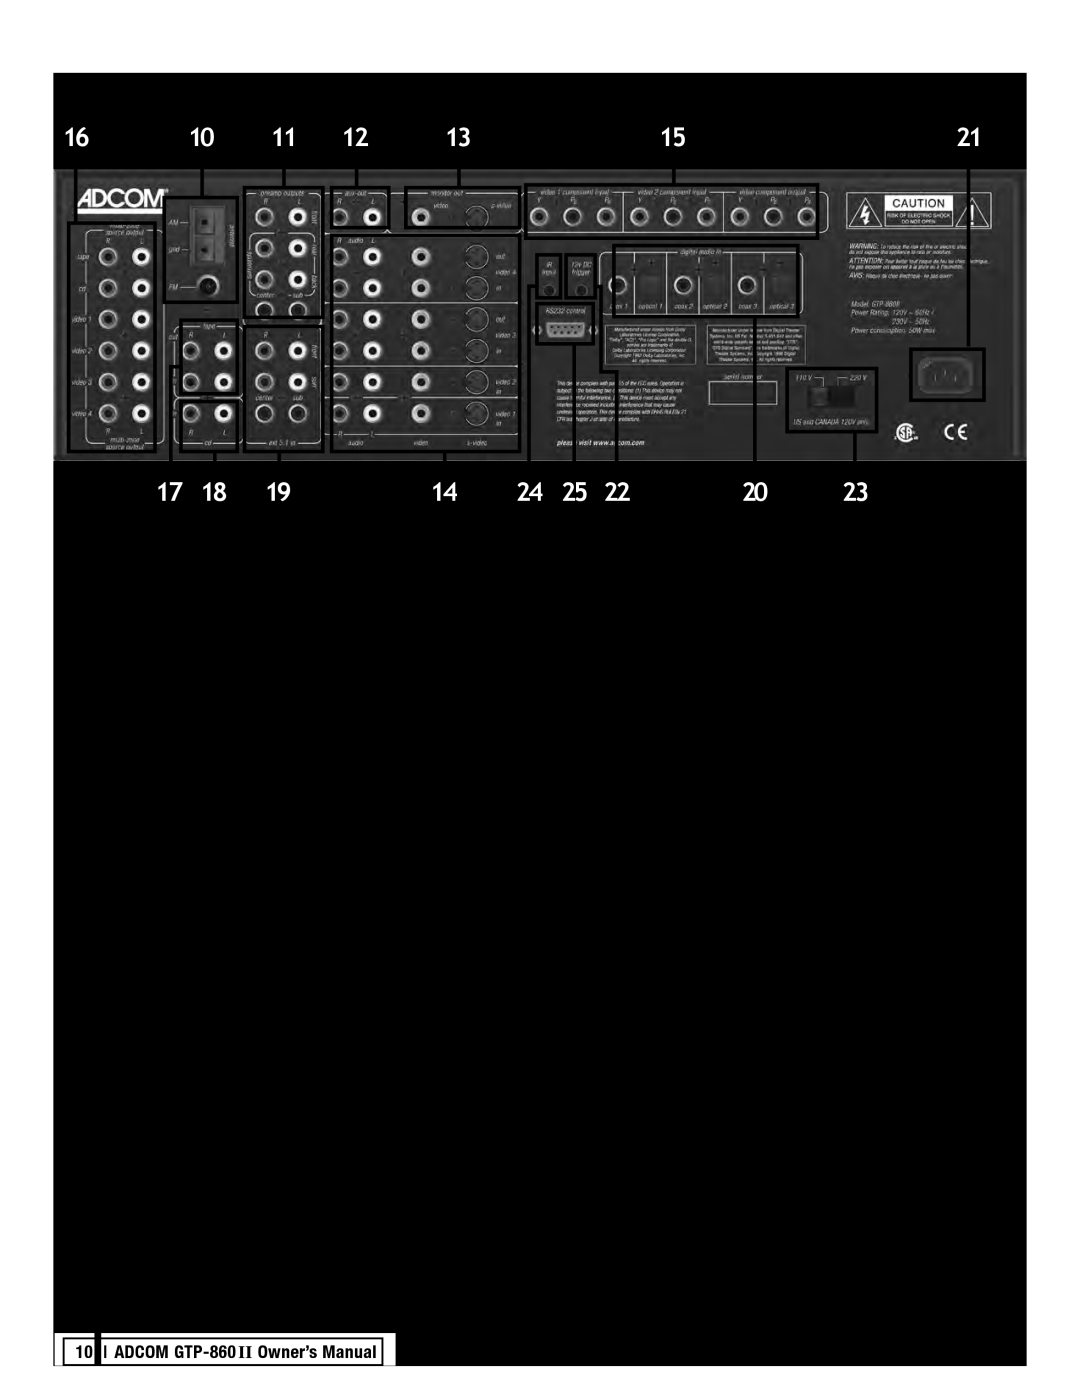 Adcom GTP-860II manual GTP-860 II Rear Panel, Preamp Outputs 12 Auxiliary Outputs, Monitor Outputs, Inputs & Outputs 